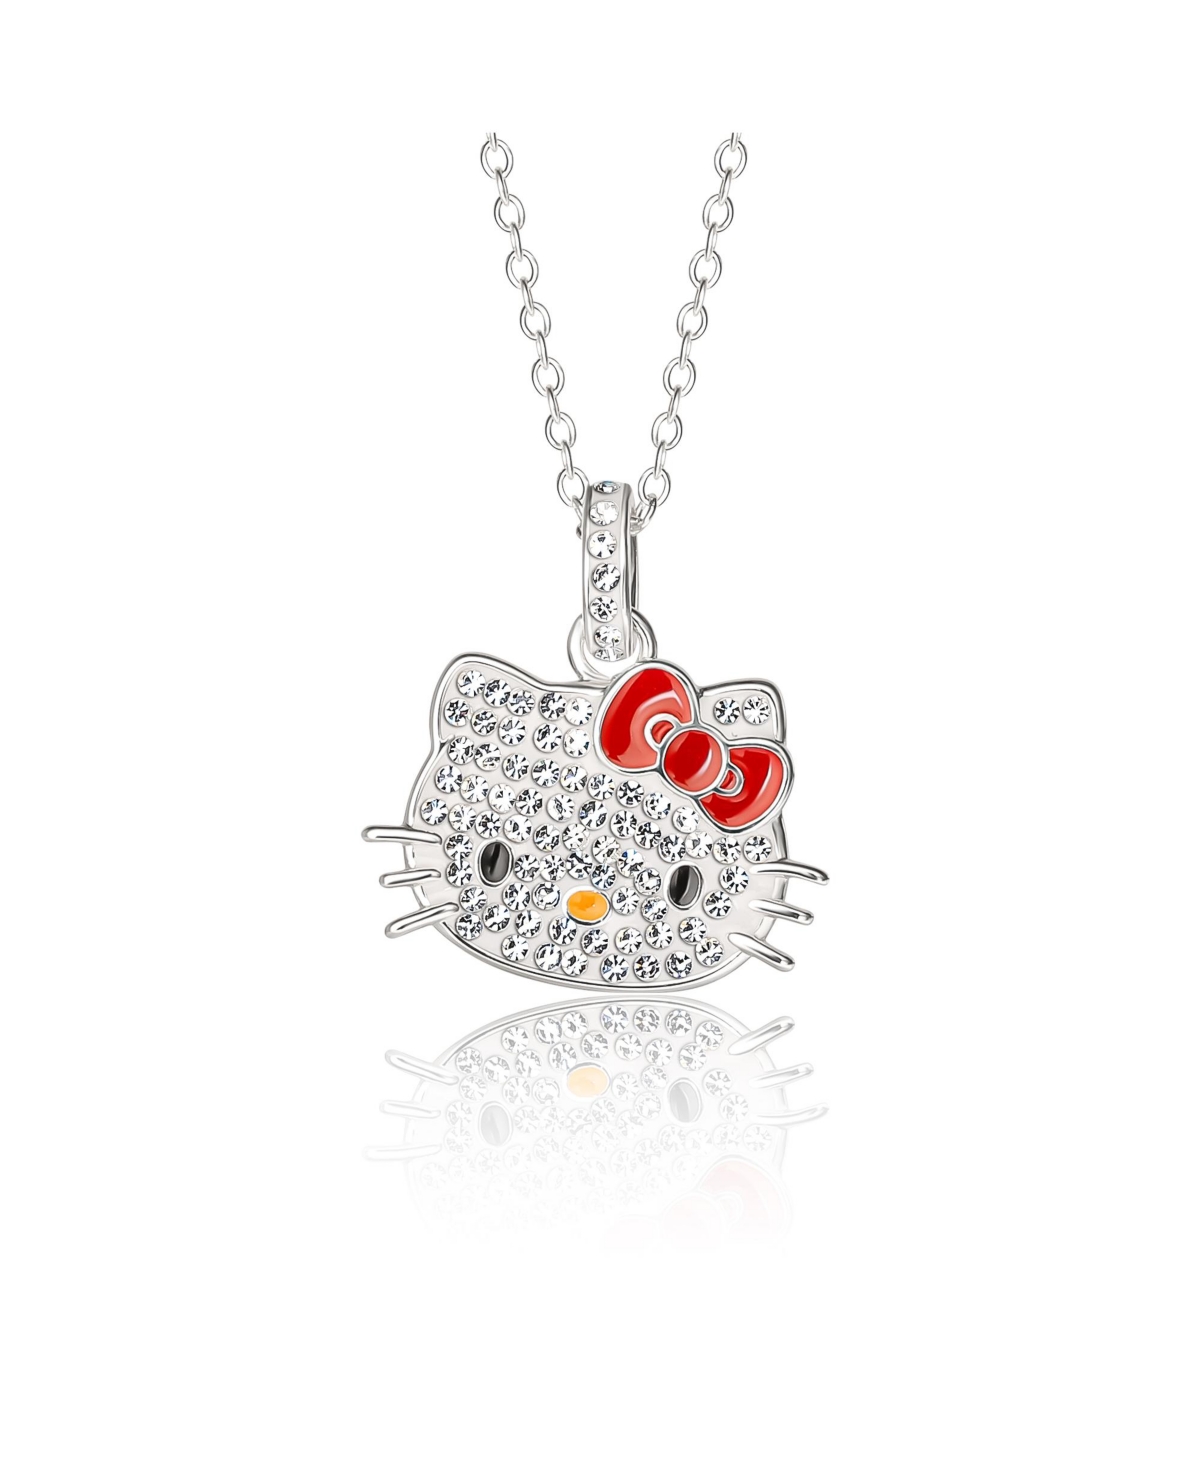 Sanrio Silver Plated Crystal Pendant - Silver tone, red